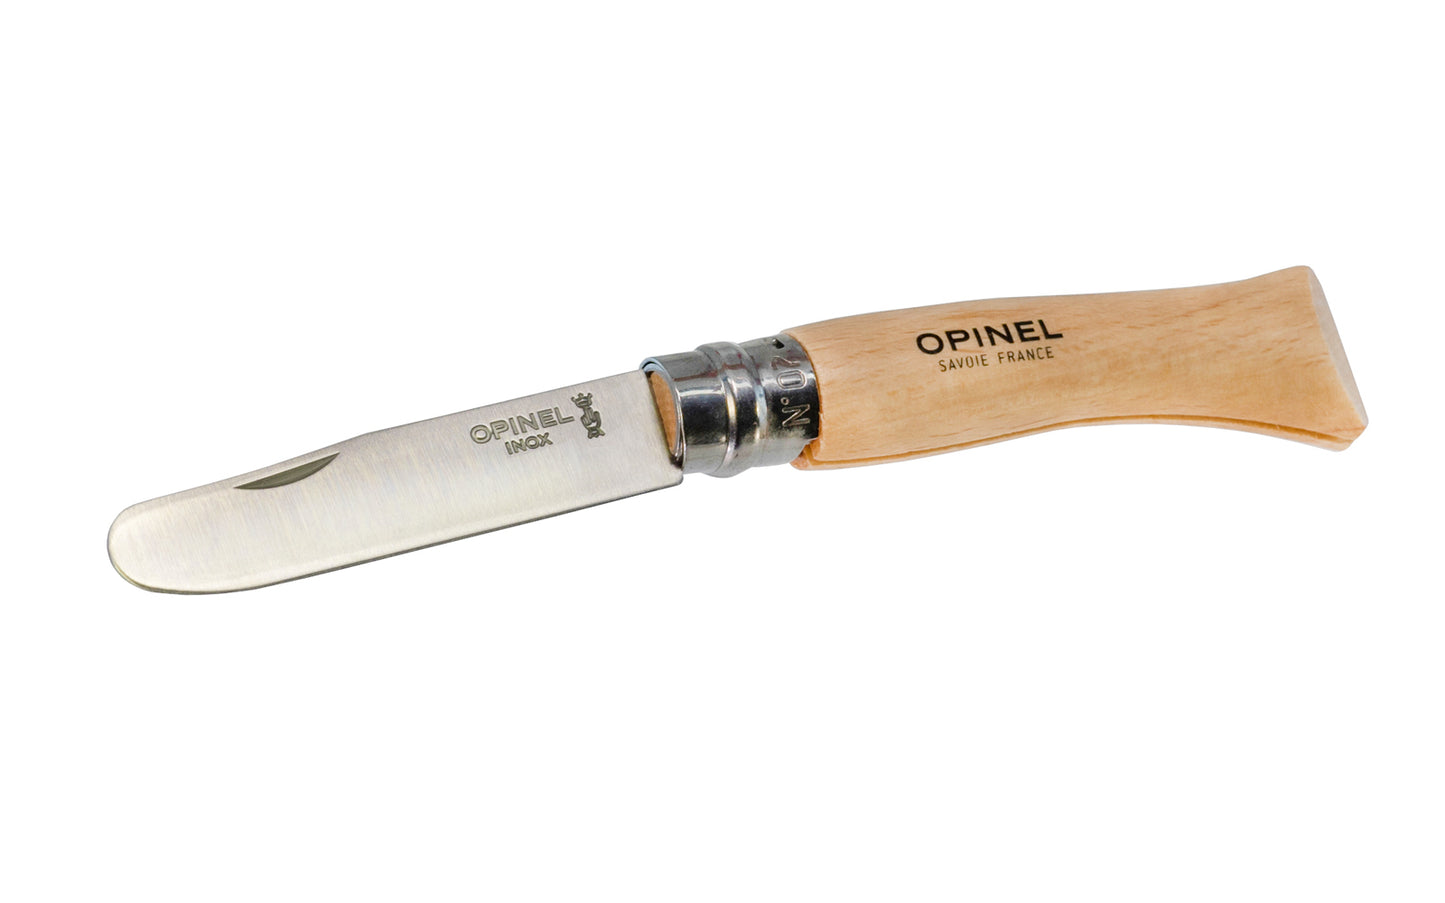 Opinel "My First Opinel Knife with Sheath